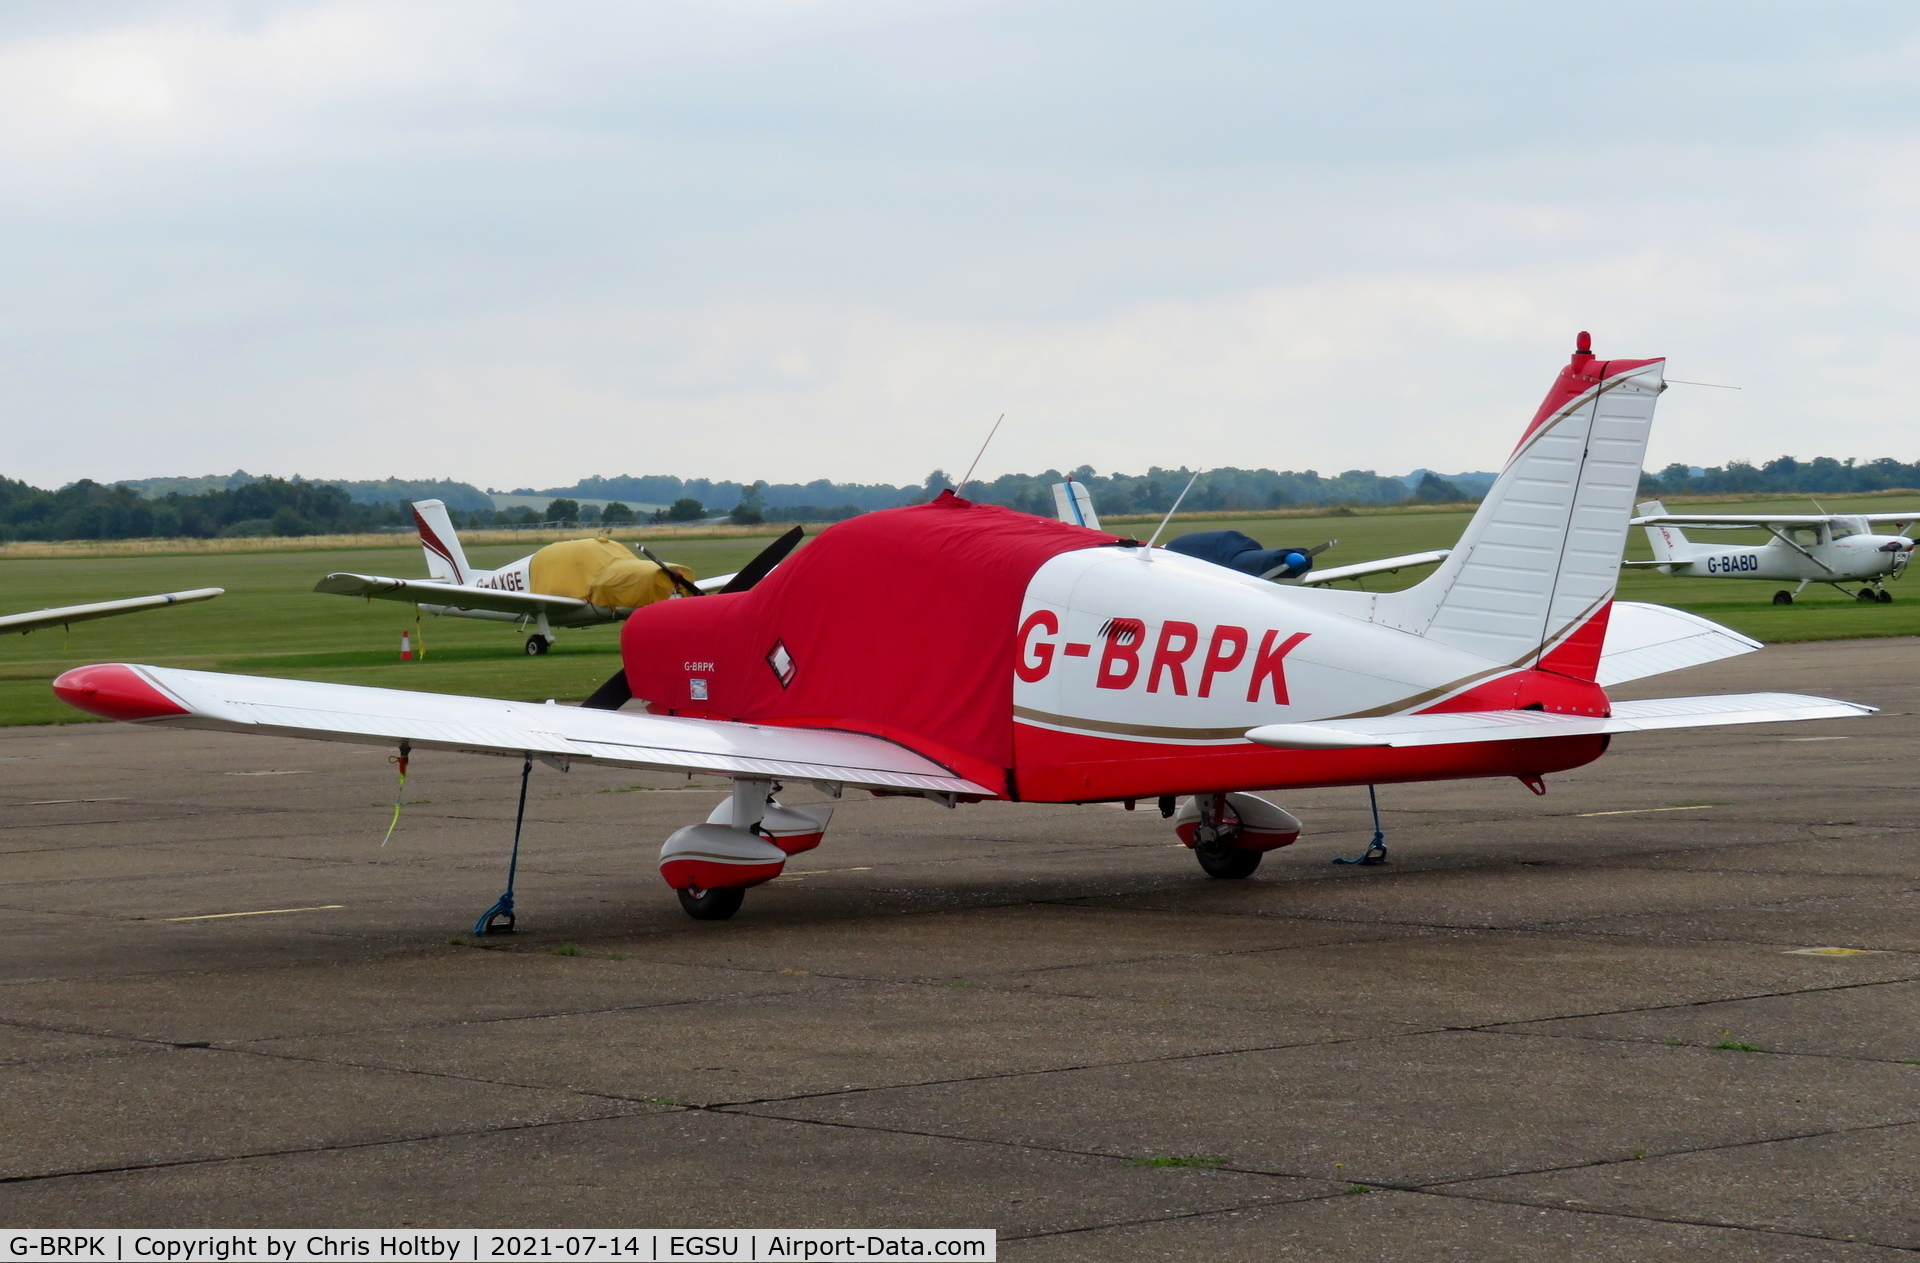 G-BRPK, 1972 Piper PA-28-140 Cherokee C/N 28-7325070, Parked and covered at Duxford Airfield Cambs.